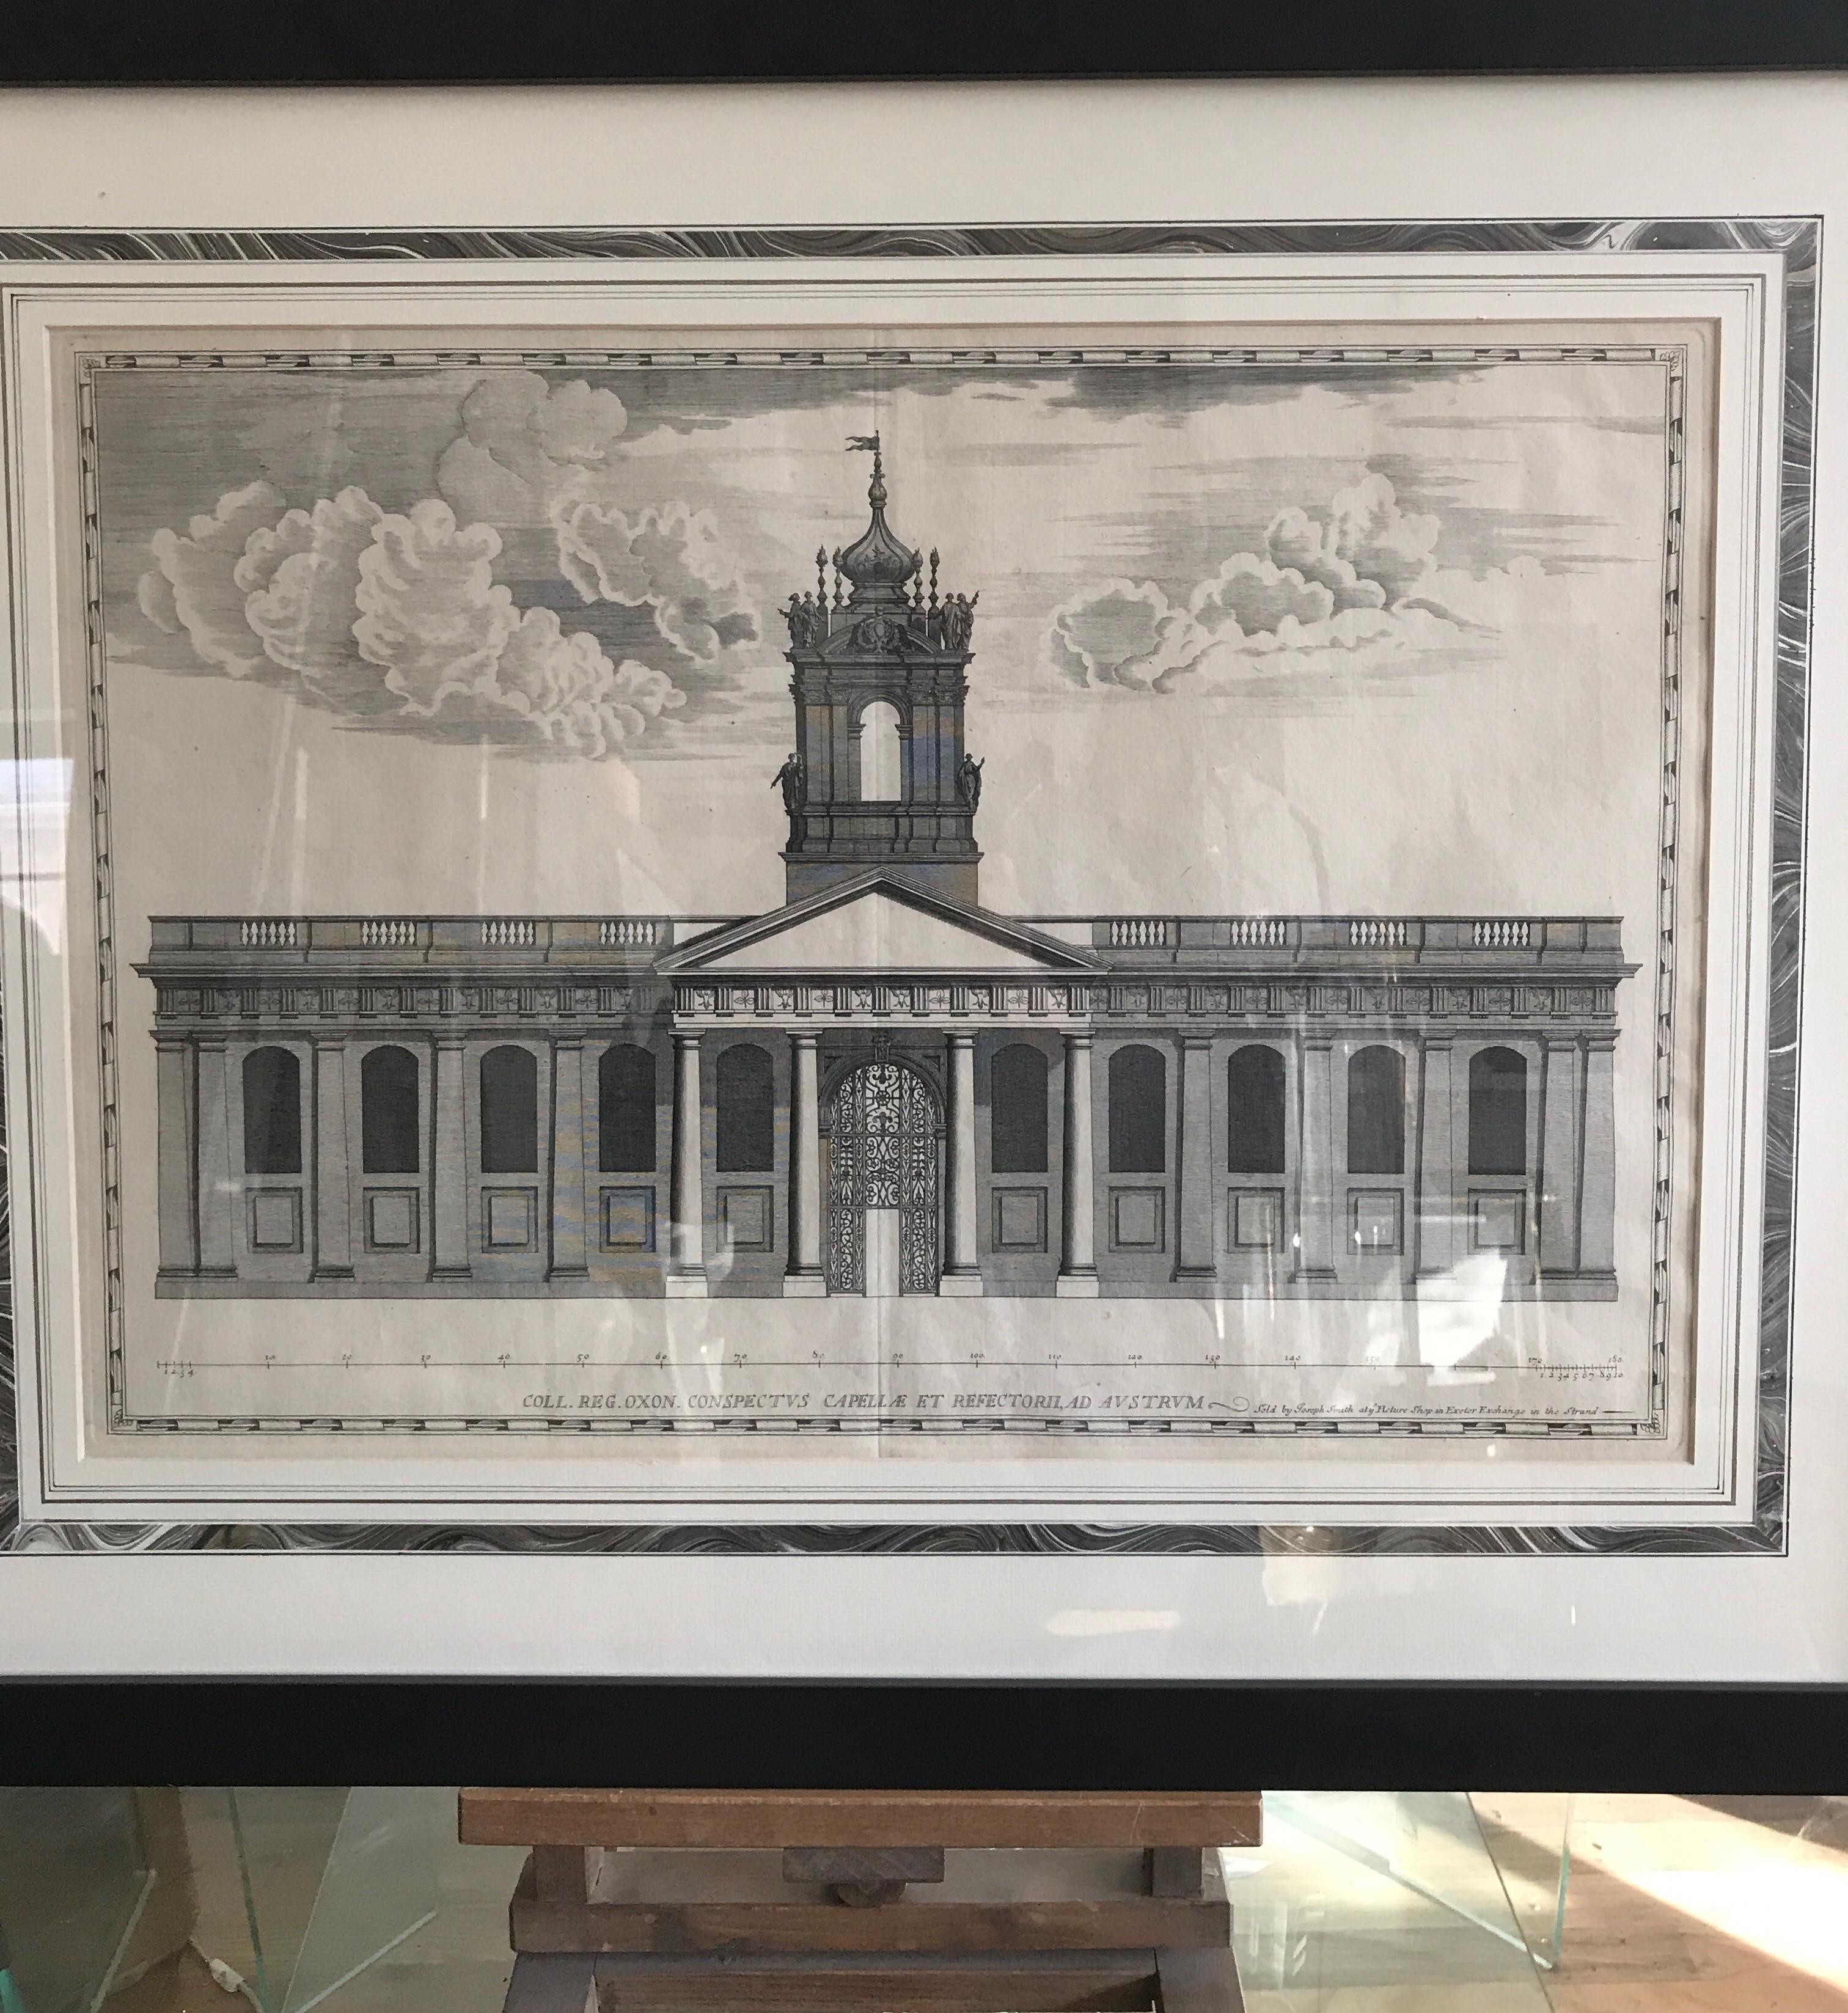 Architectural rendering of an Administration building on the campus of
Oxford University. The engraving is 18th century. Beautifully framed and matted
with a marbleized border. The bottom of the engraving reads:
Coll. Reg. Oxon. Conspectus Capellae